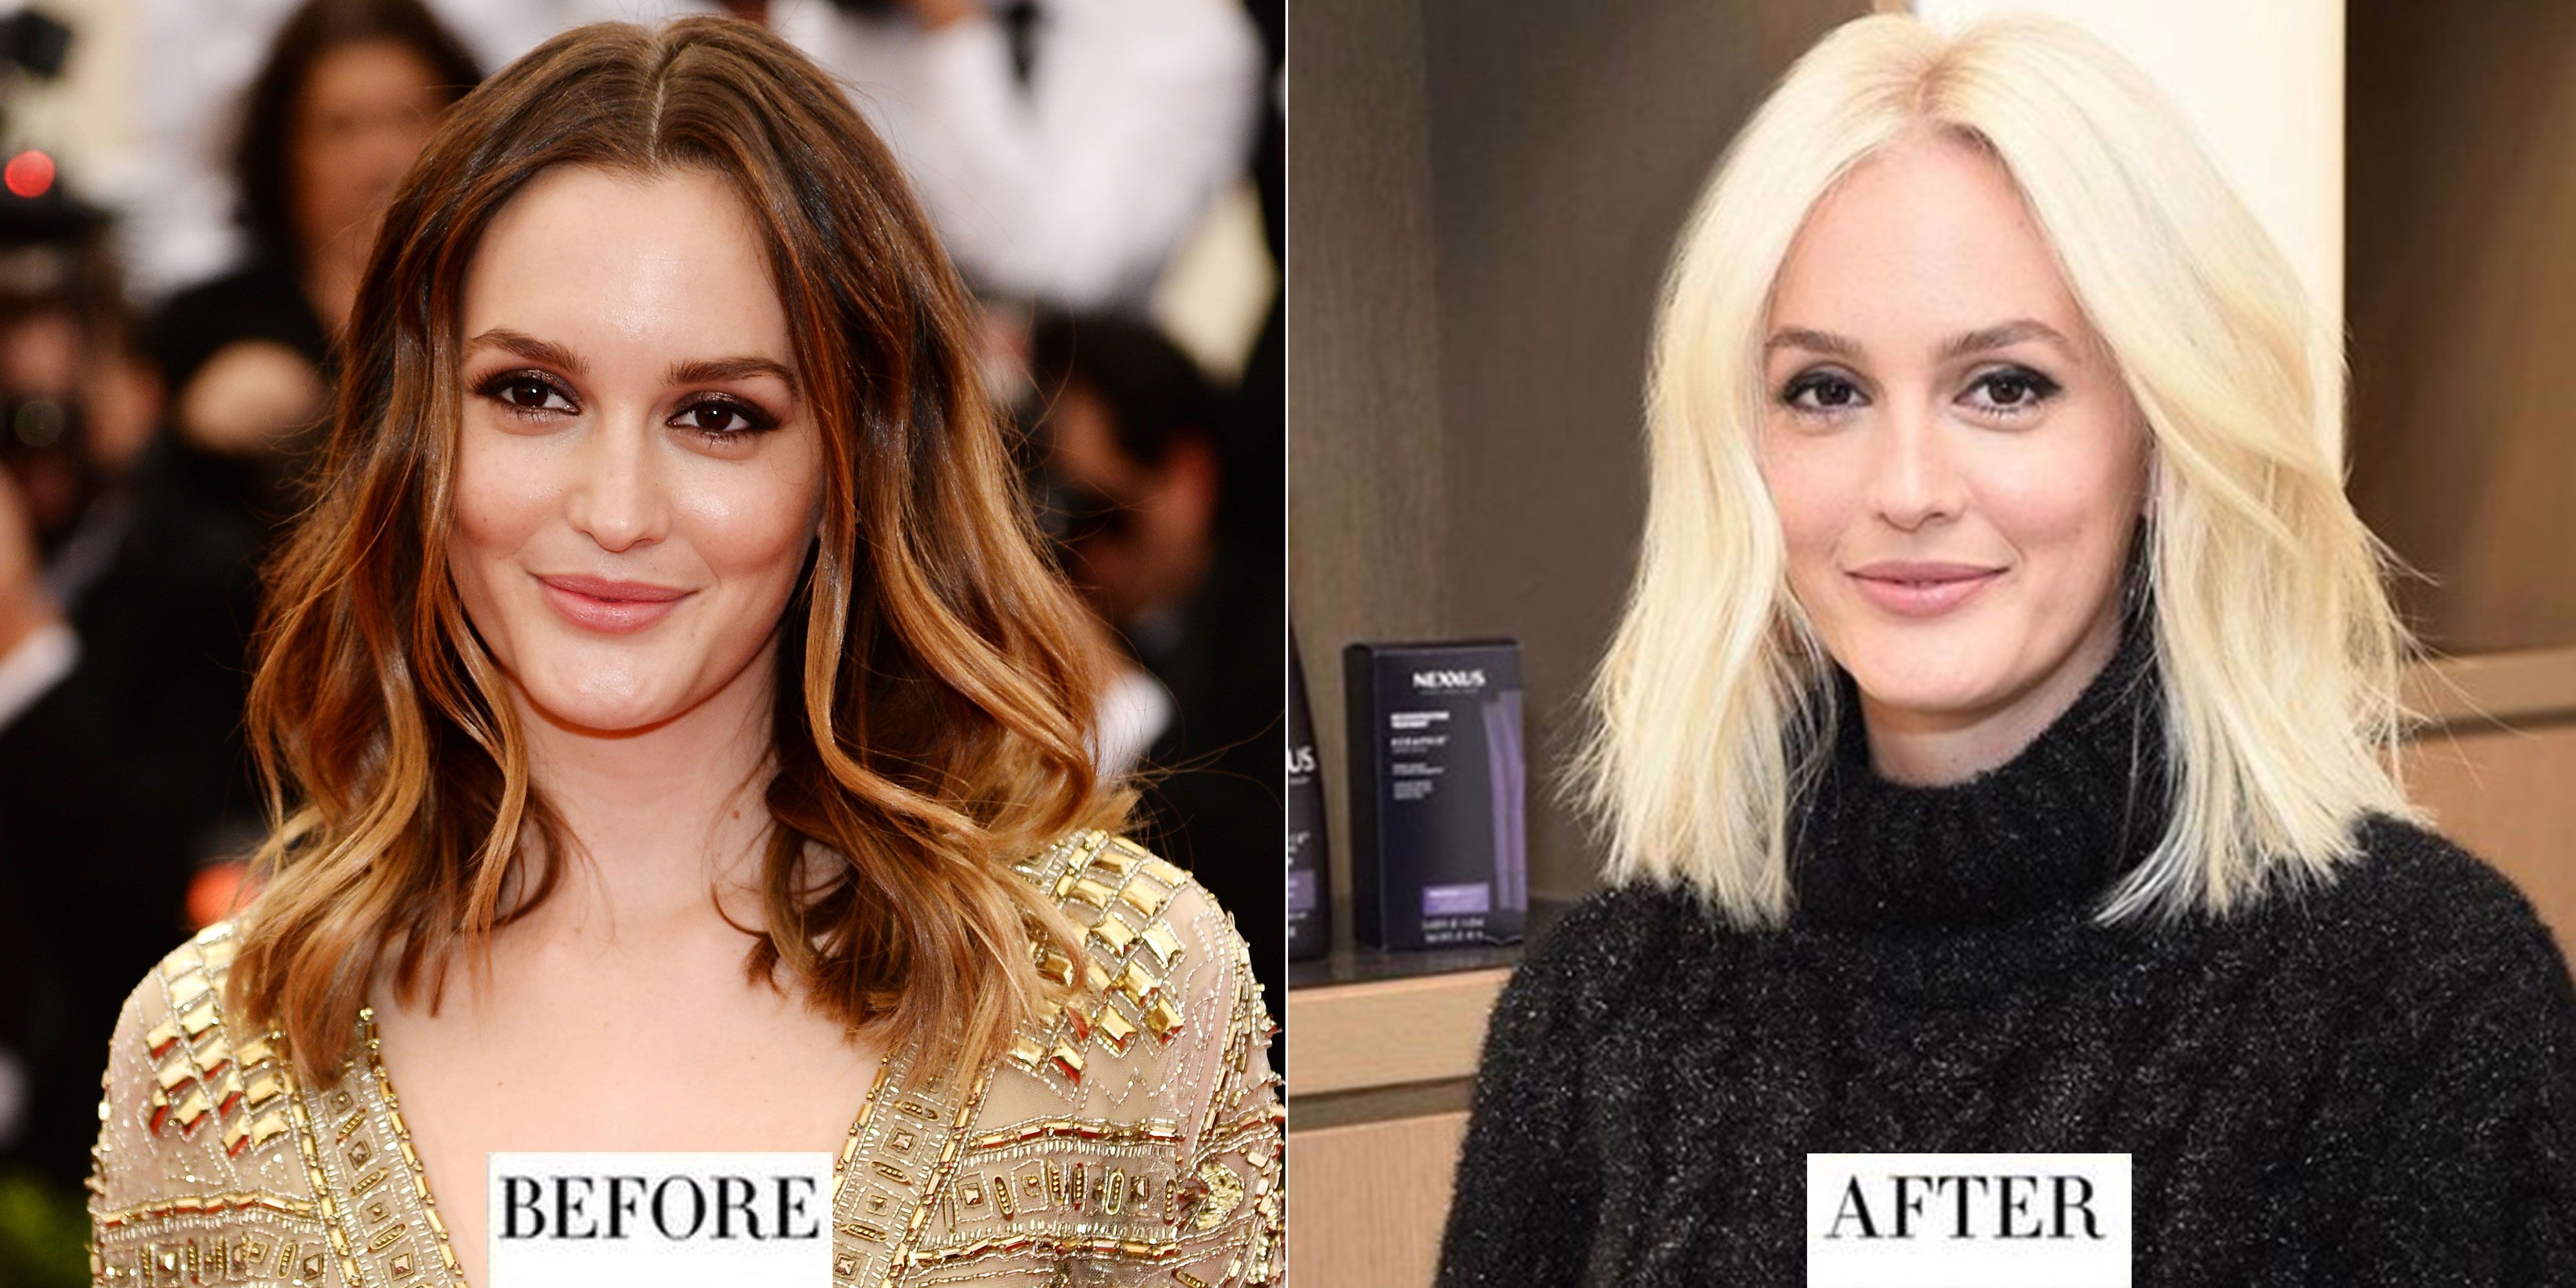 6. "The Most Beautiful Blond Hair Transformations on Instagram" - wide 3